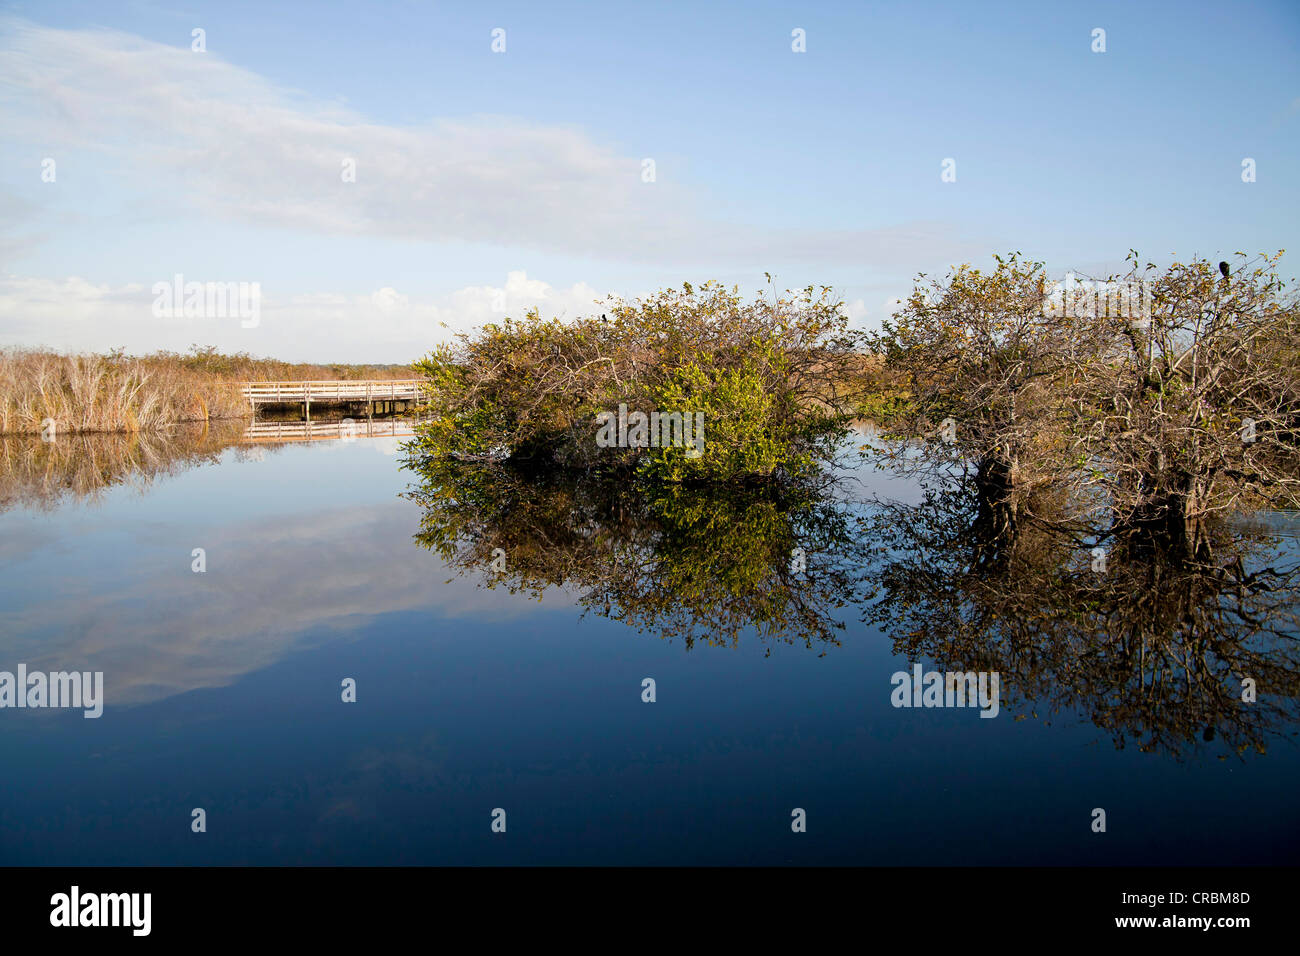 Typical vegetation along the Anhinga Trail reflected in the water, Everglades National Park in Florida, USA Stock Photo